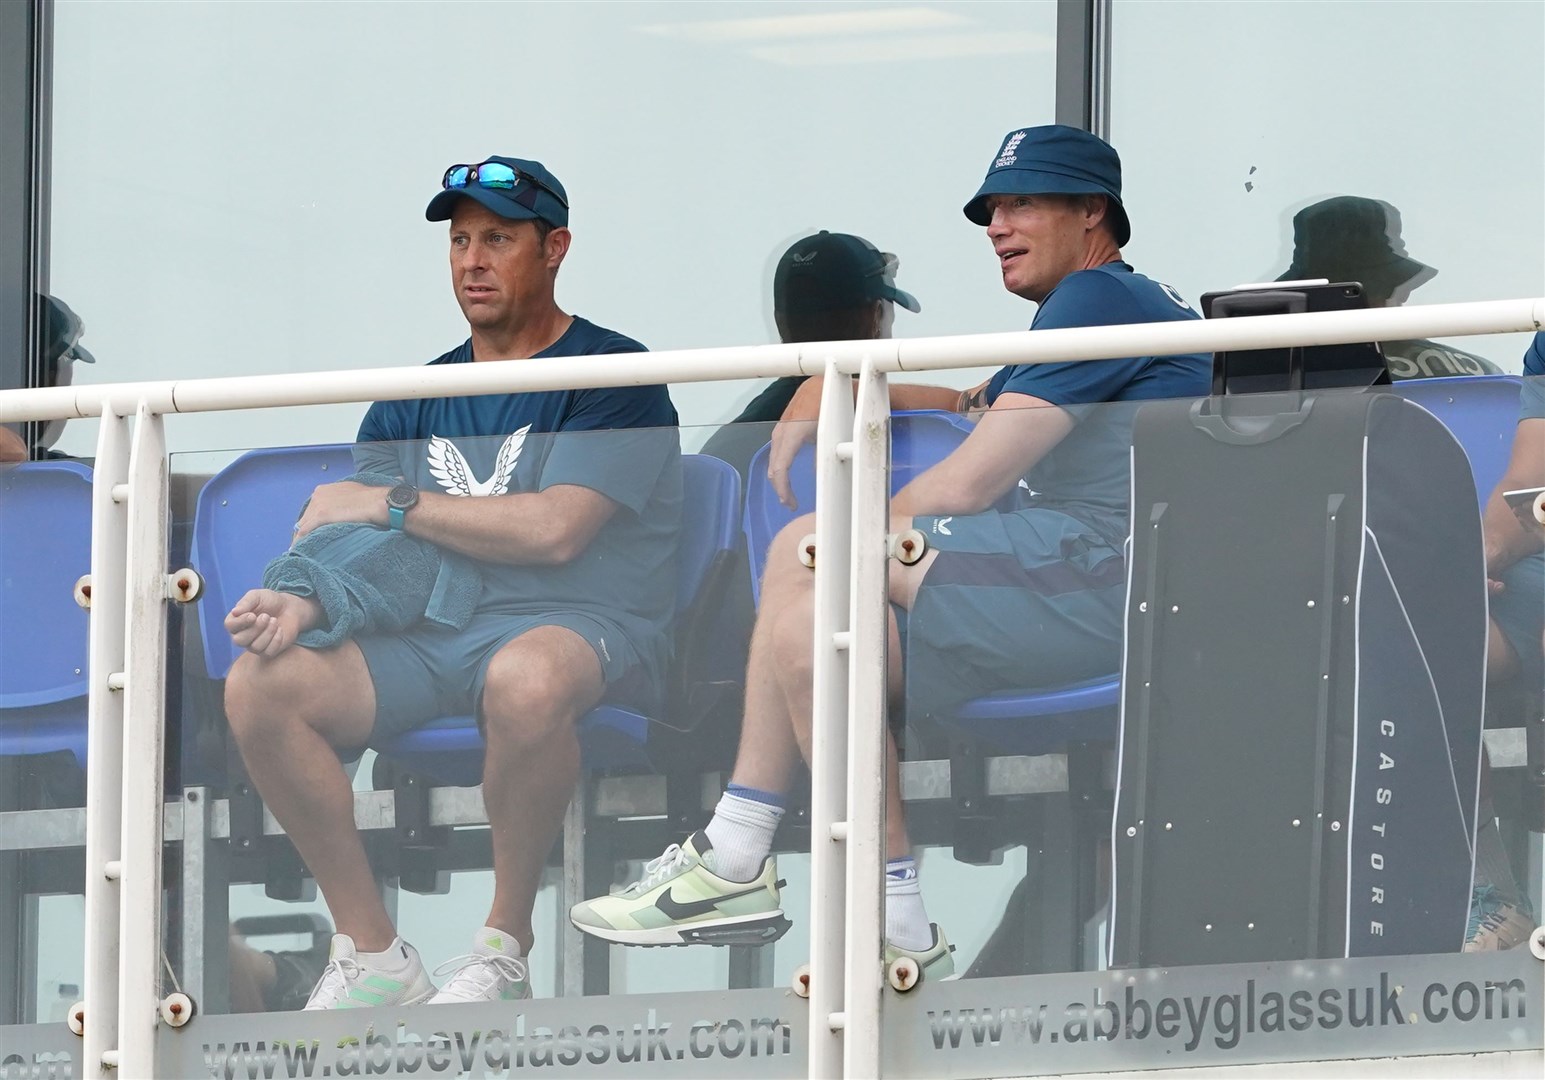 England batting coach Marcus Trescothick (left) and Flintoff in the stands during the first one-day international match (Joe Giddens/PA)